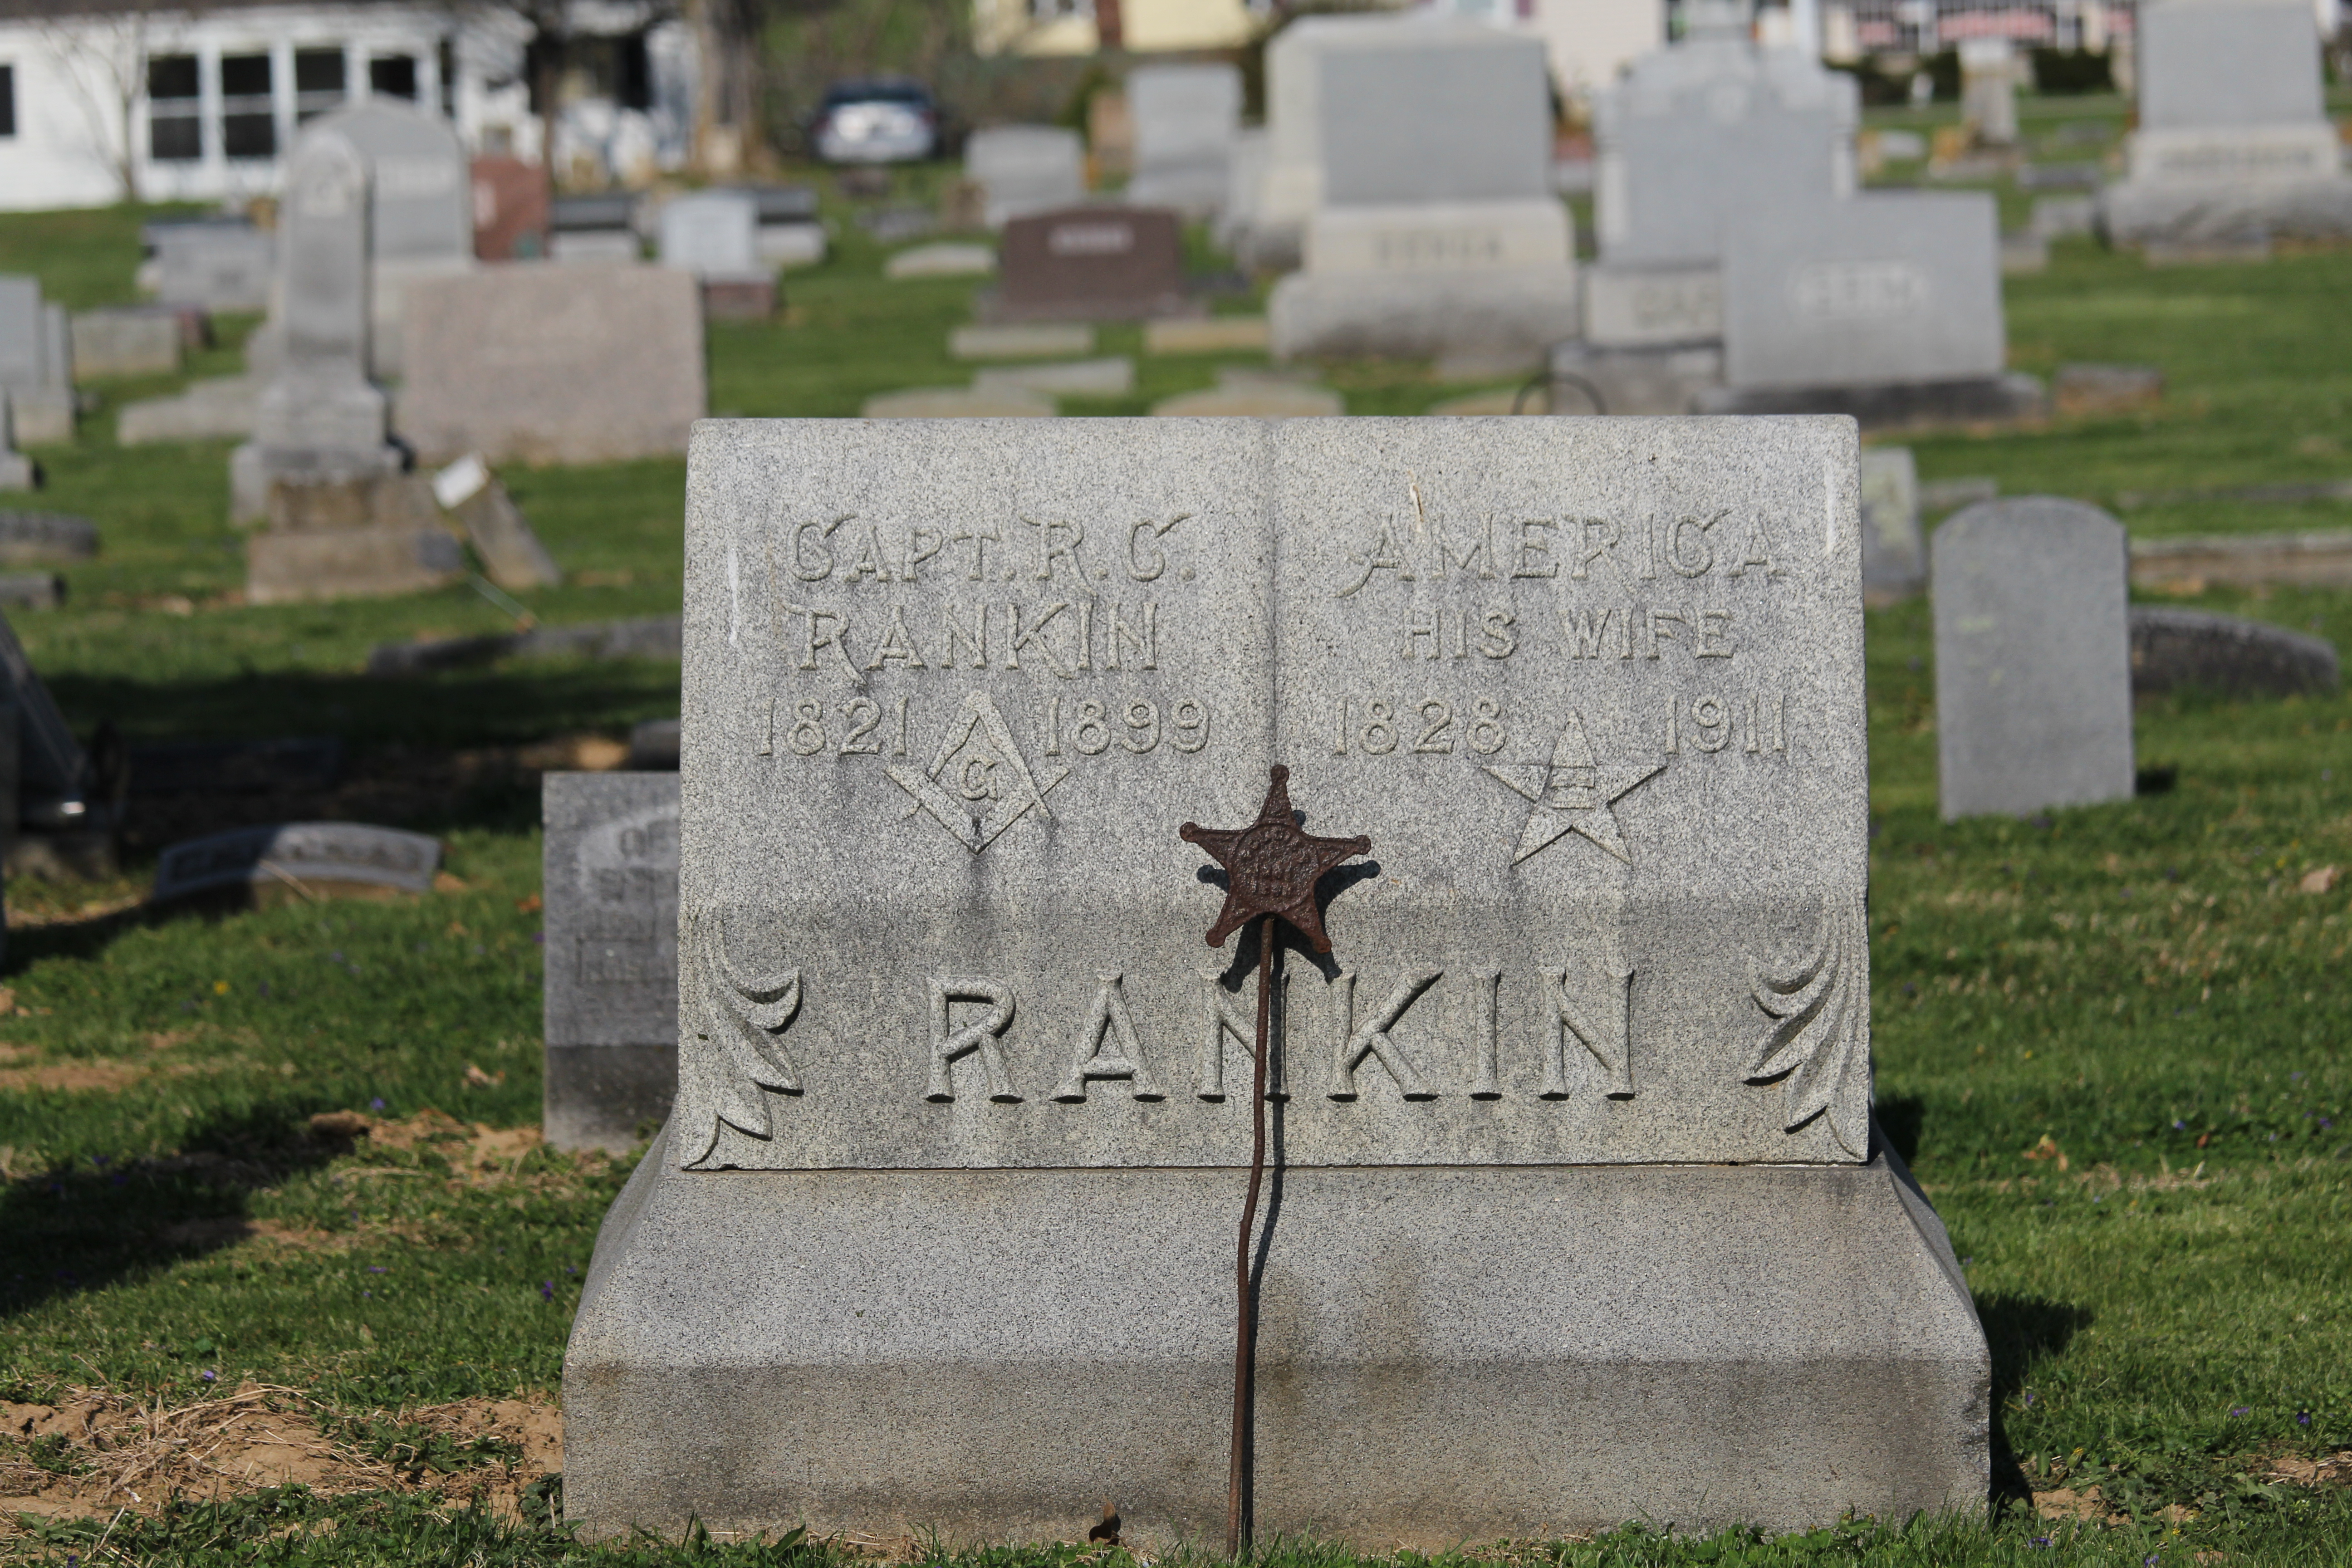 The grave of John Rankin and his wife, located in Ripley, Ohio.